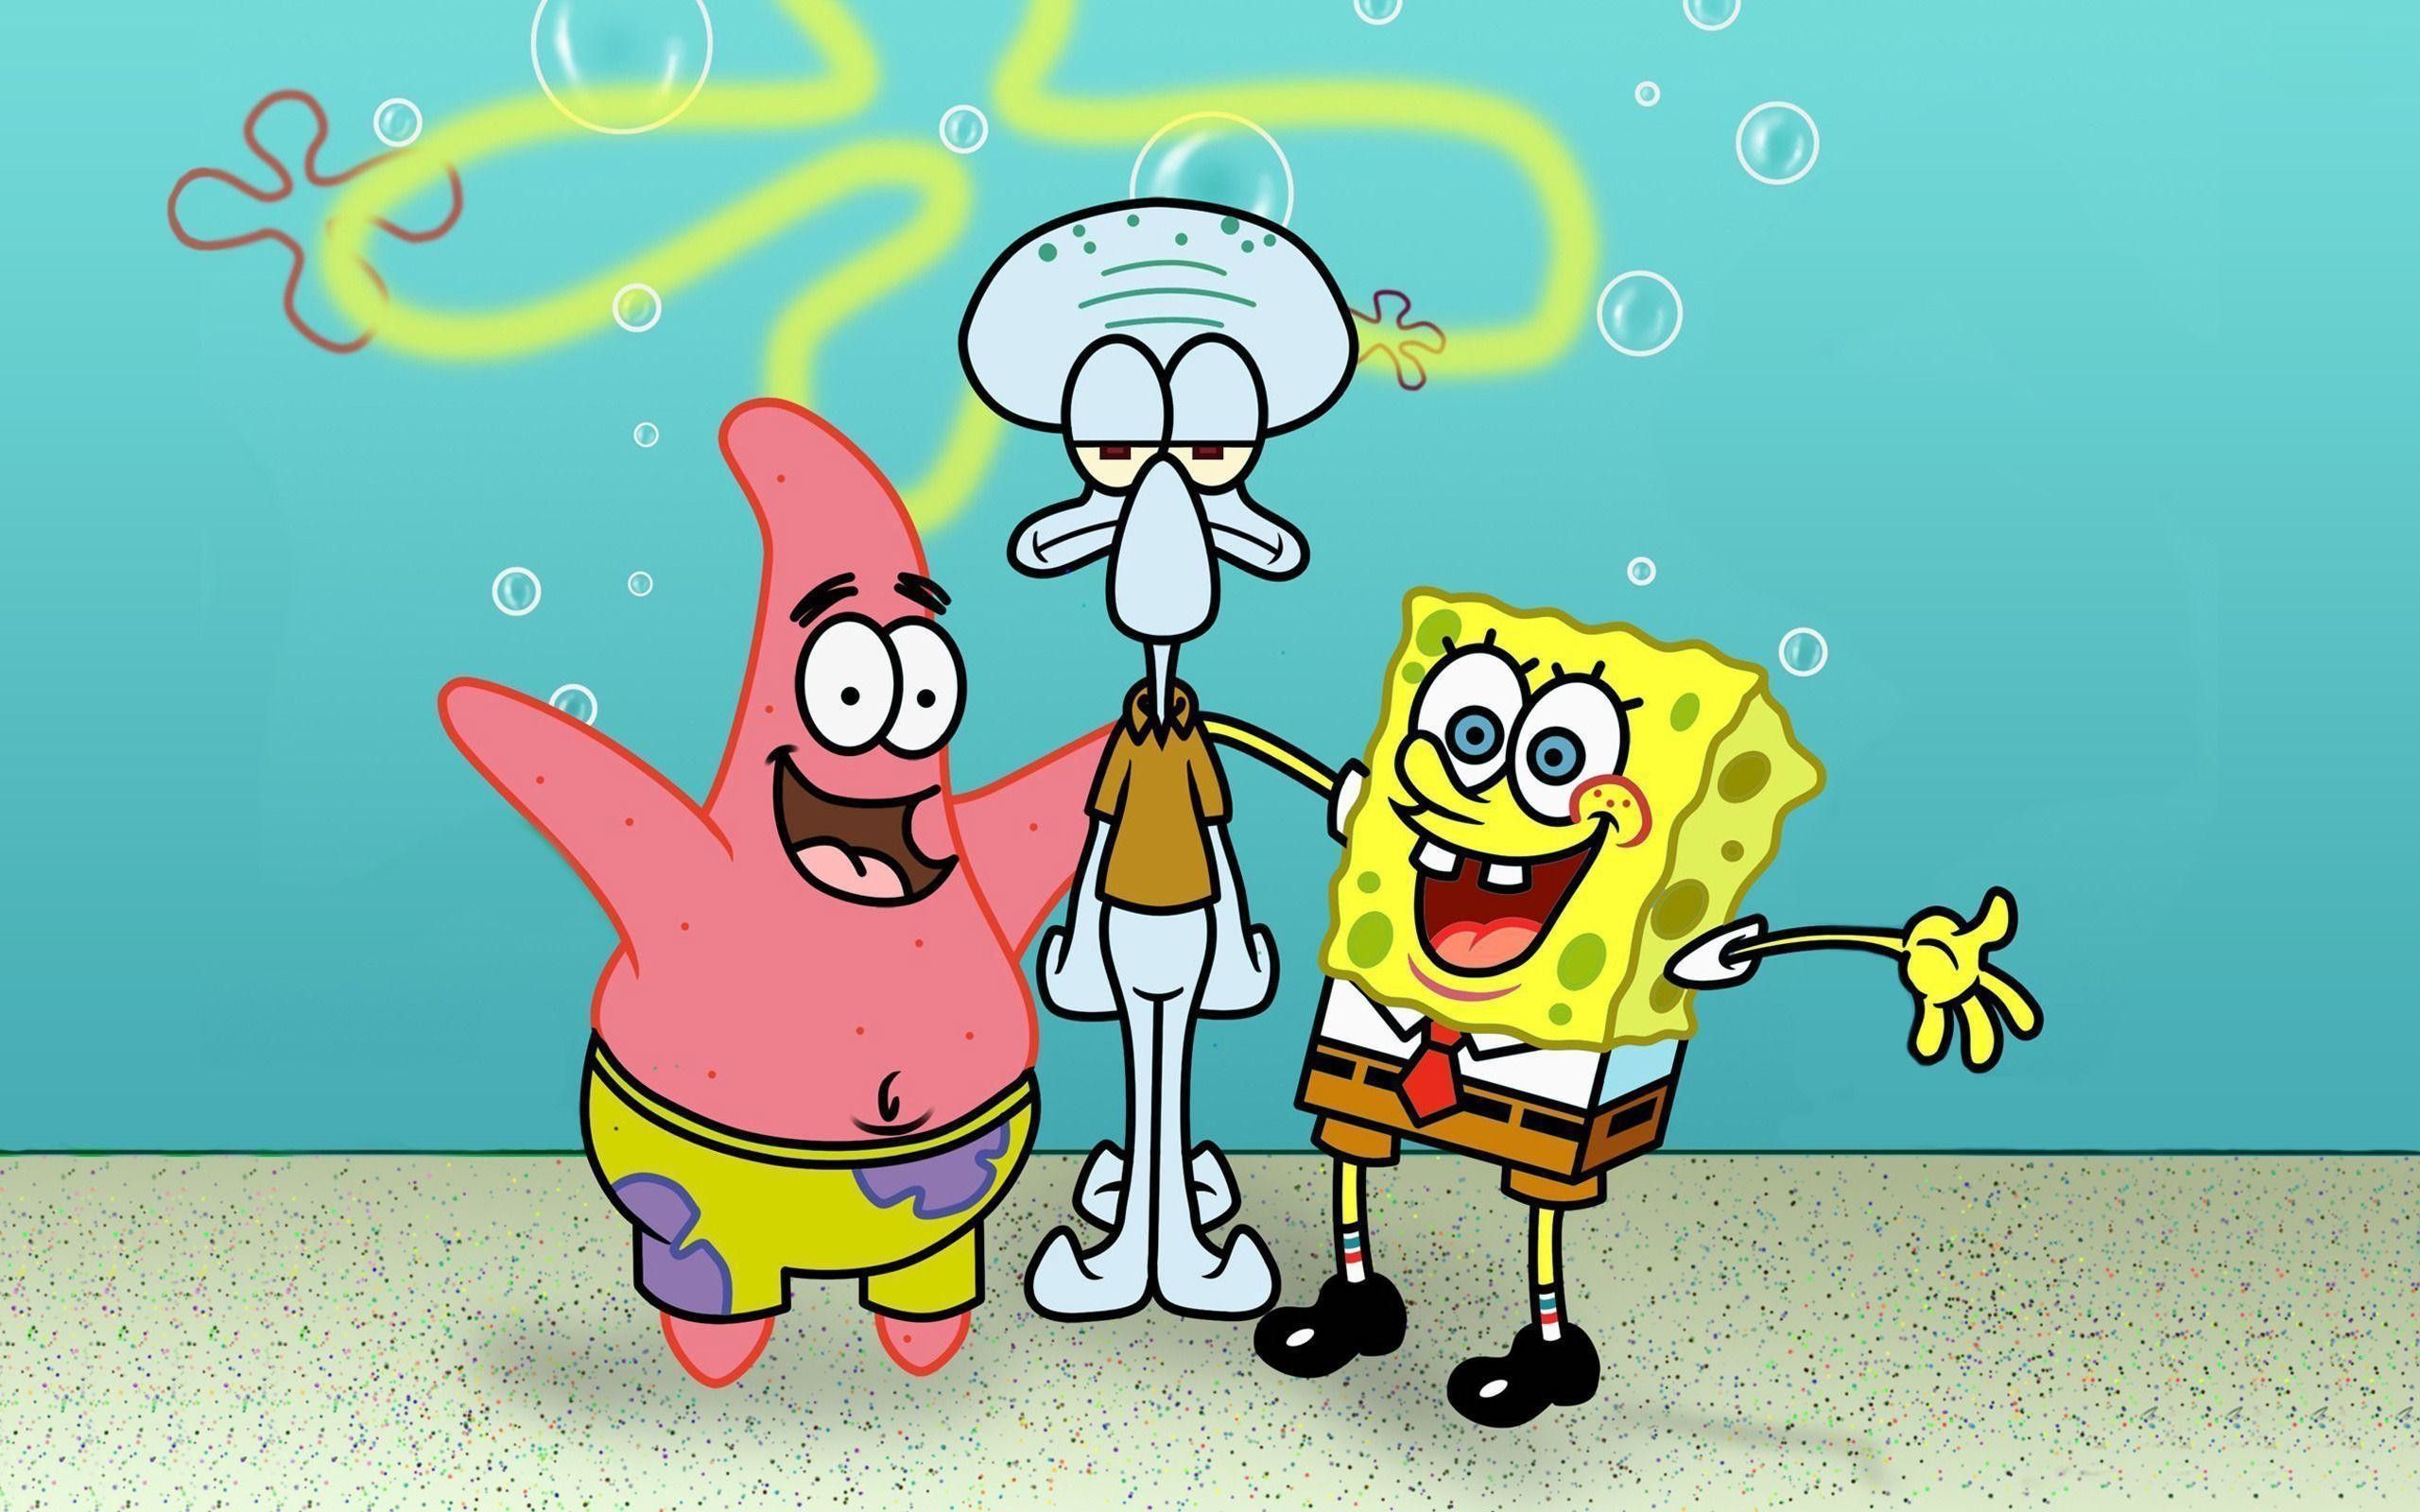 Patrick, Squidward, and SpongeBob are all in a group pose, with SpongeBob and Patrick on the left and Squidward on the right. They are all smiling and looking at the camera. There are bubbles in the air and a yellow star above them. - Squidward, SpongeBob